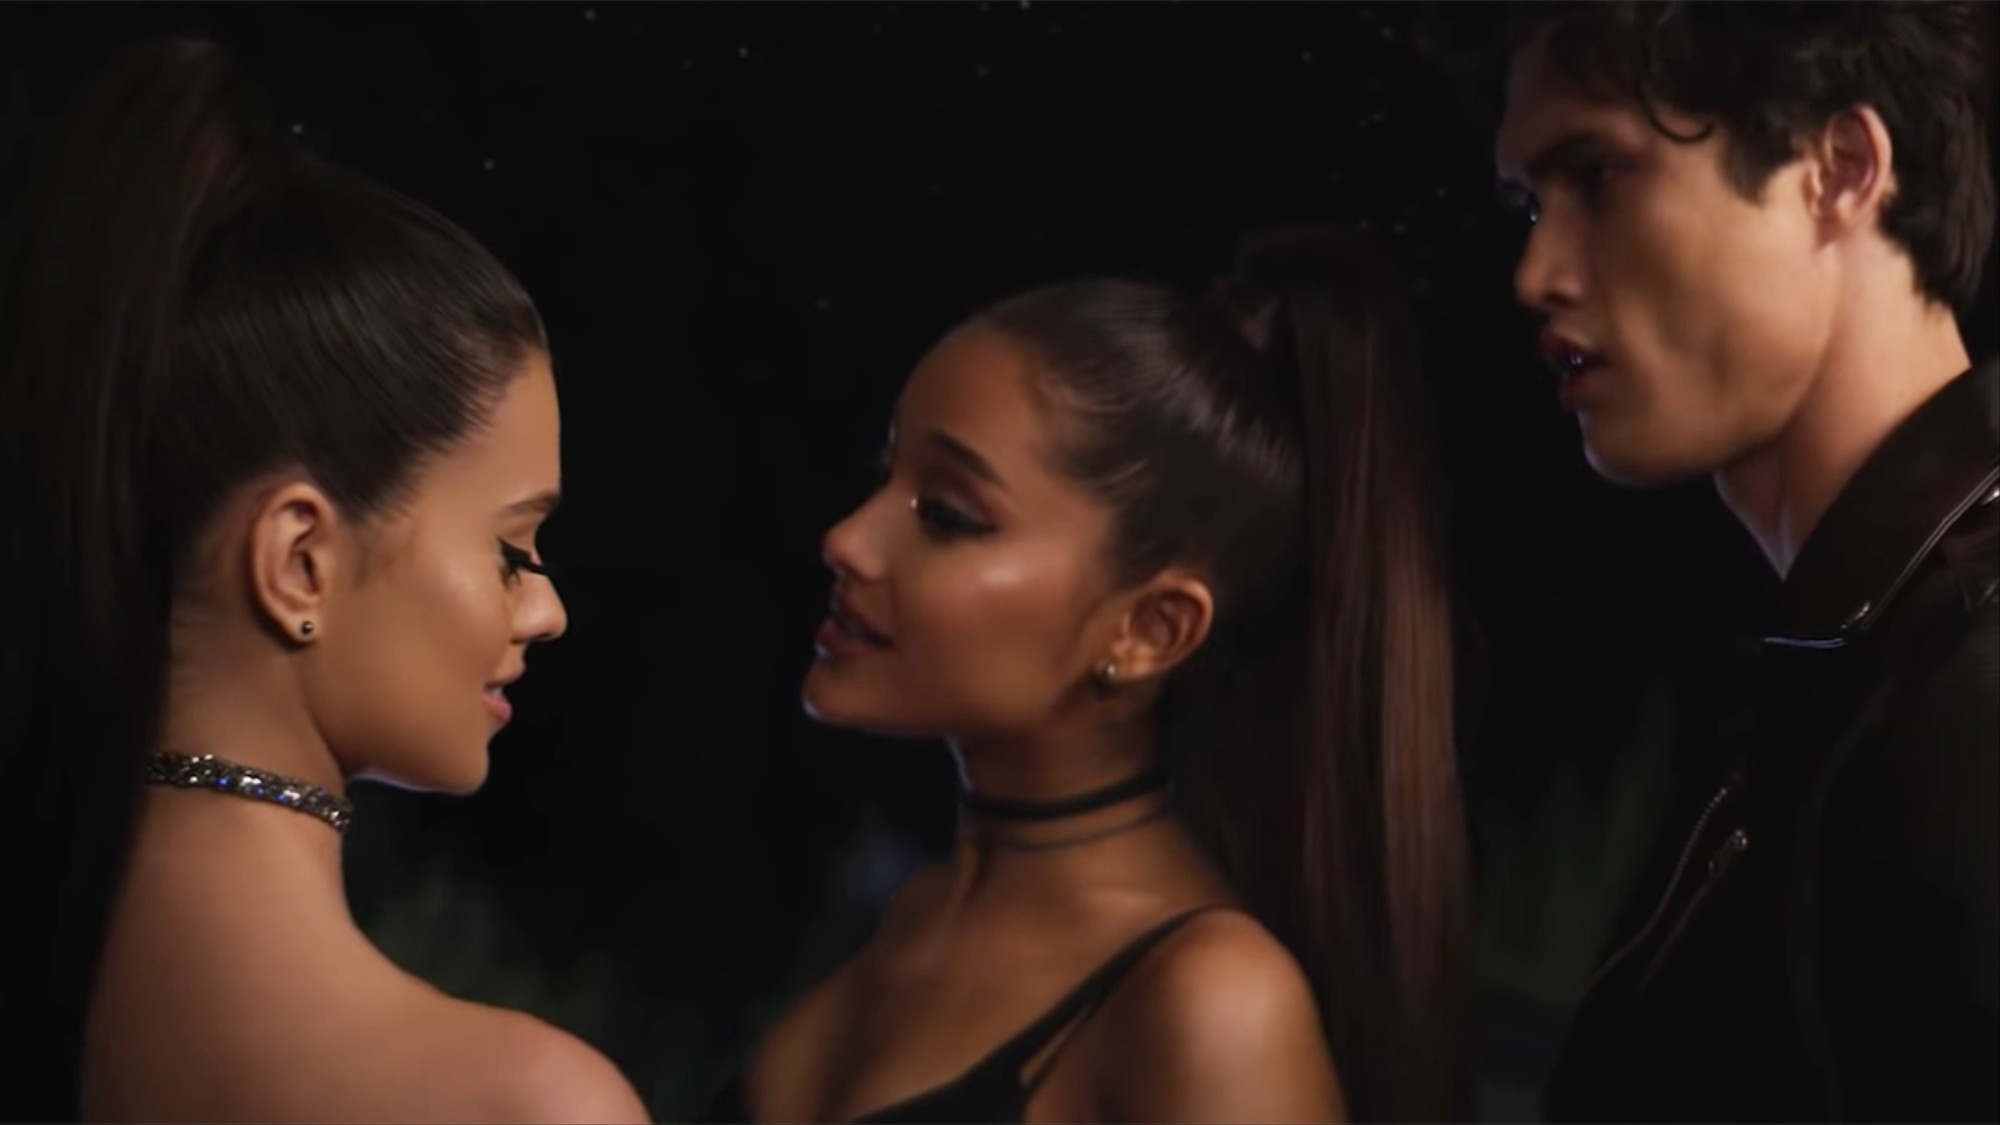 Ariana Grandes New Music Video Has A Controversial Ending